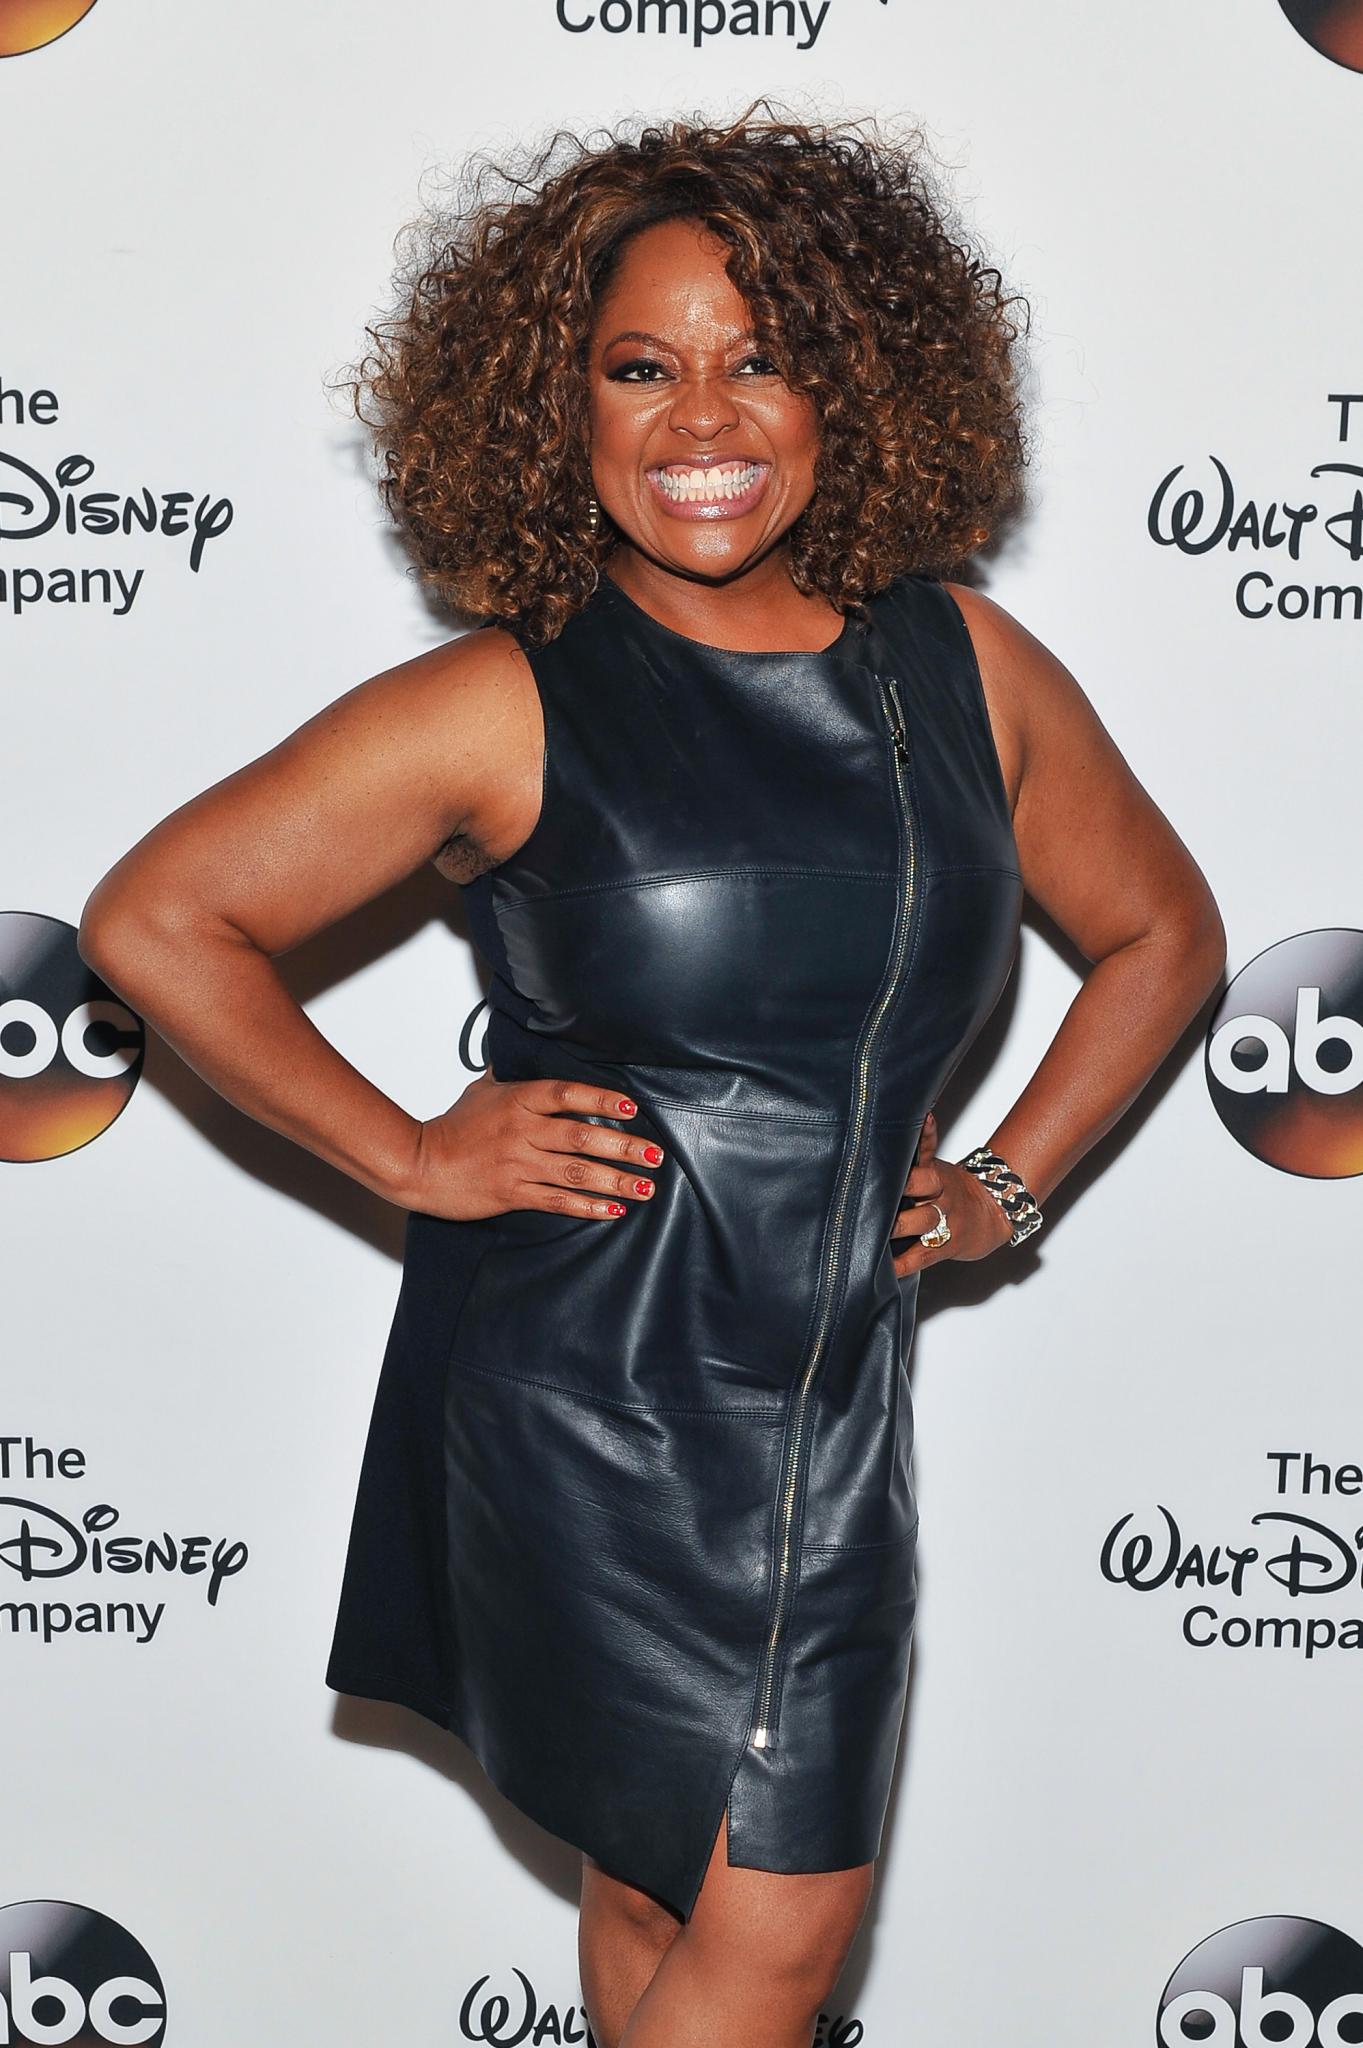 It's Official! Sherri Shepard Is Returning to 'The View'